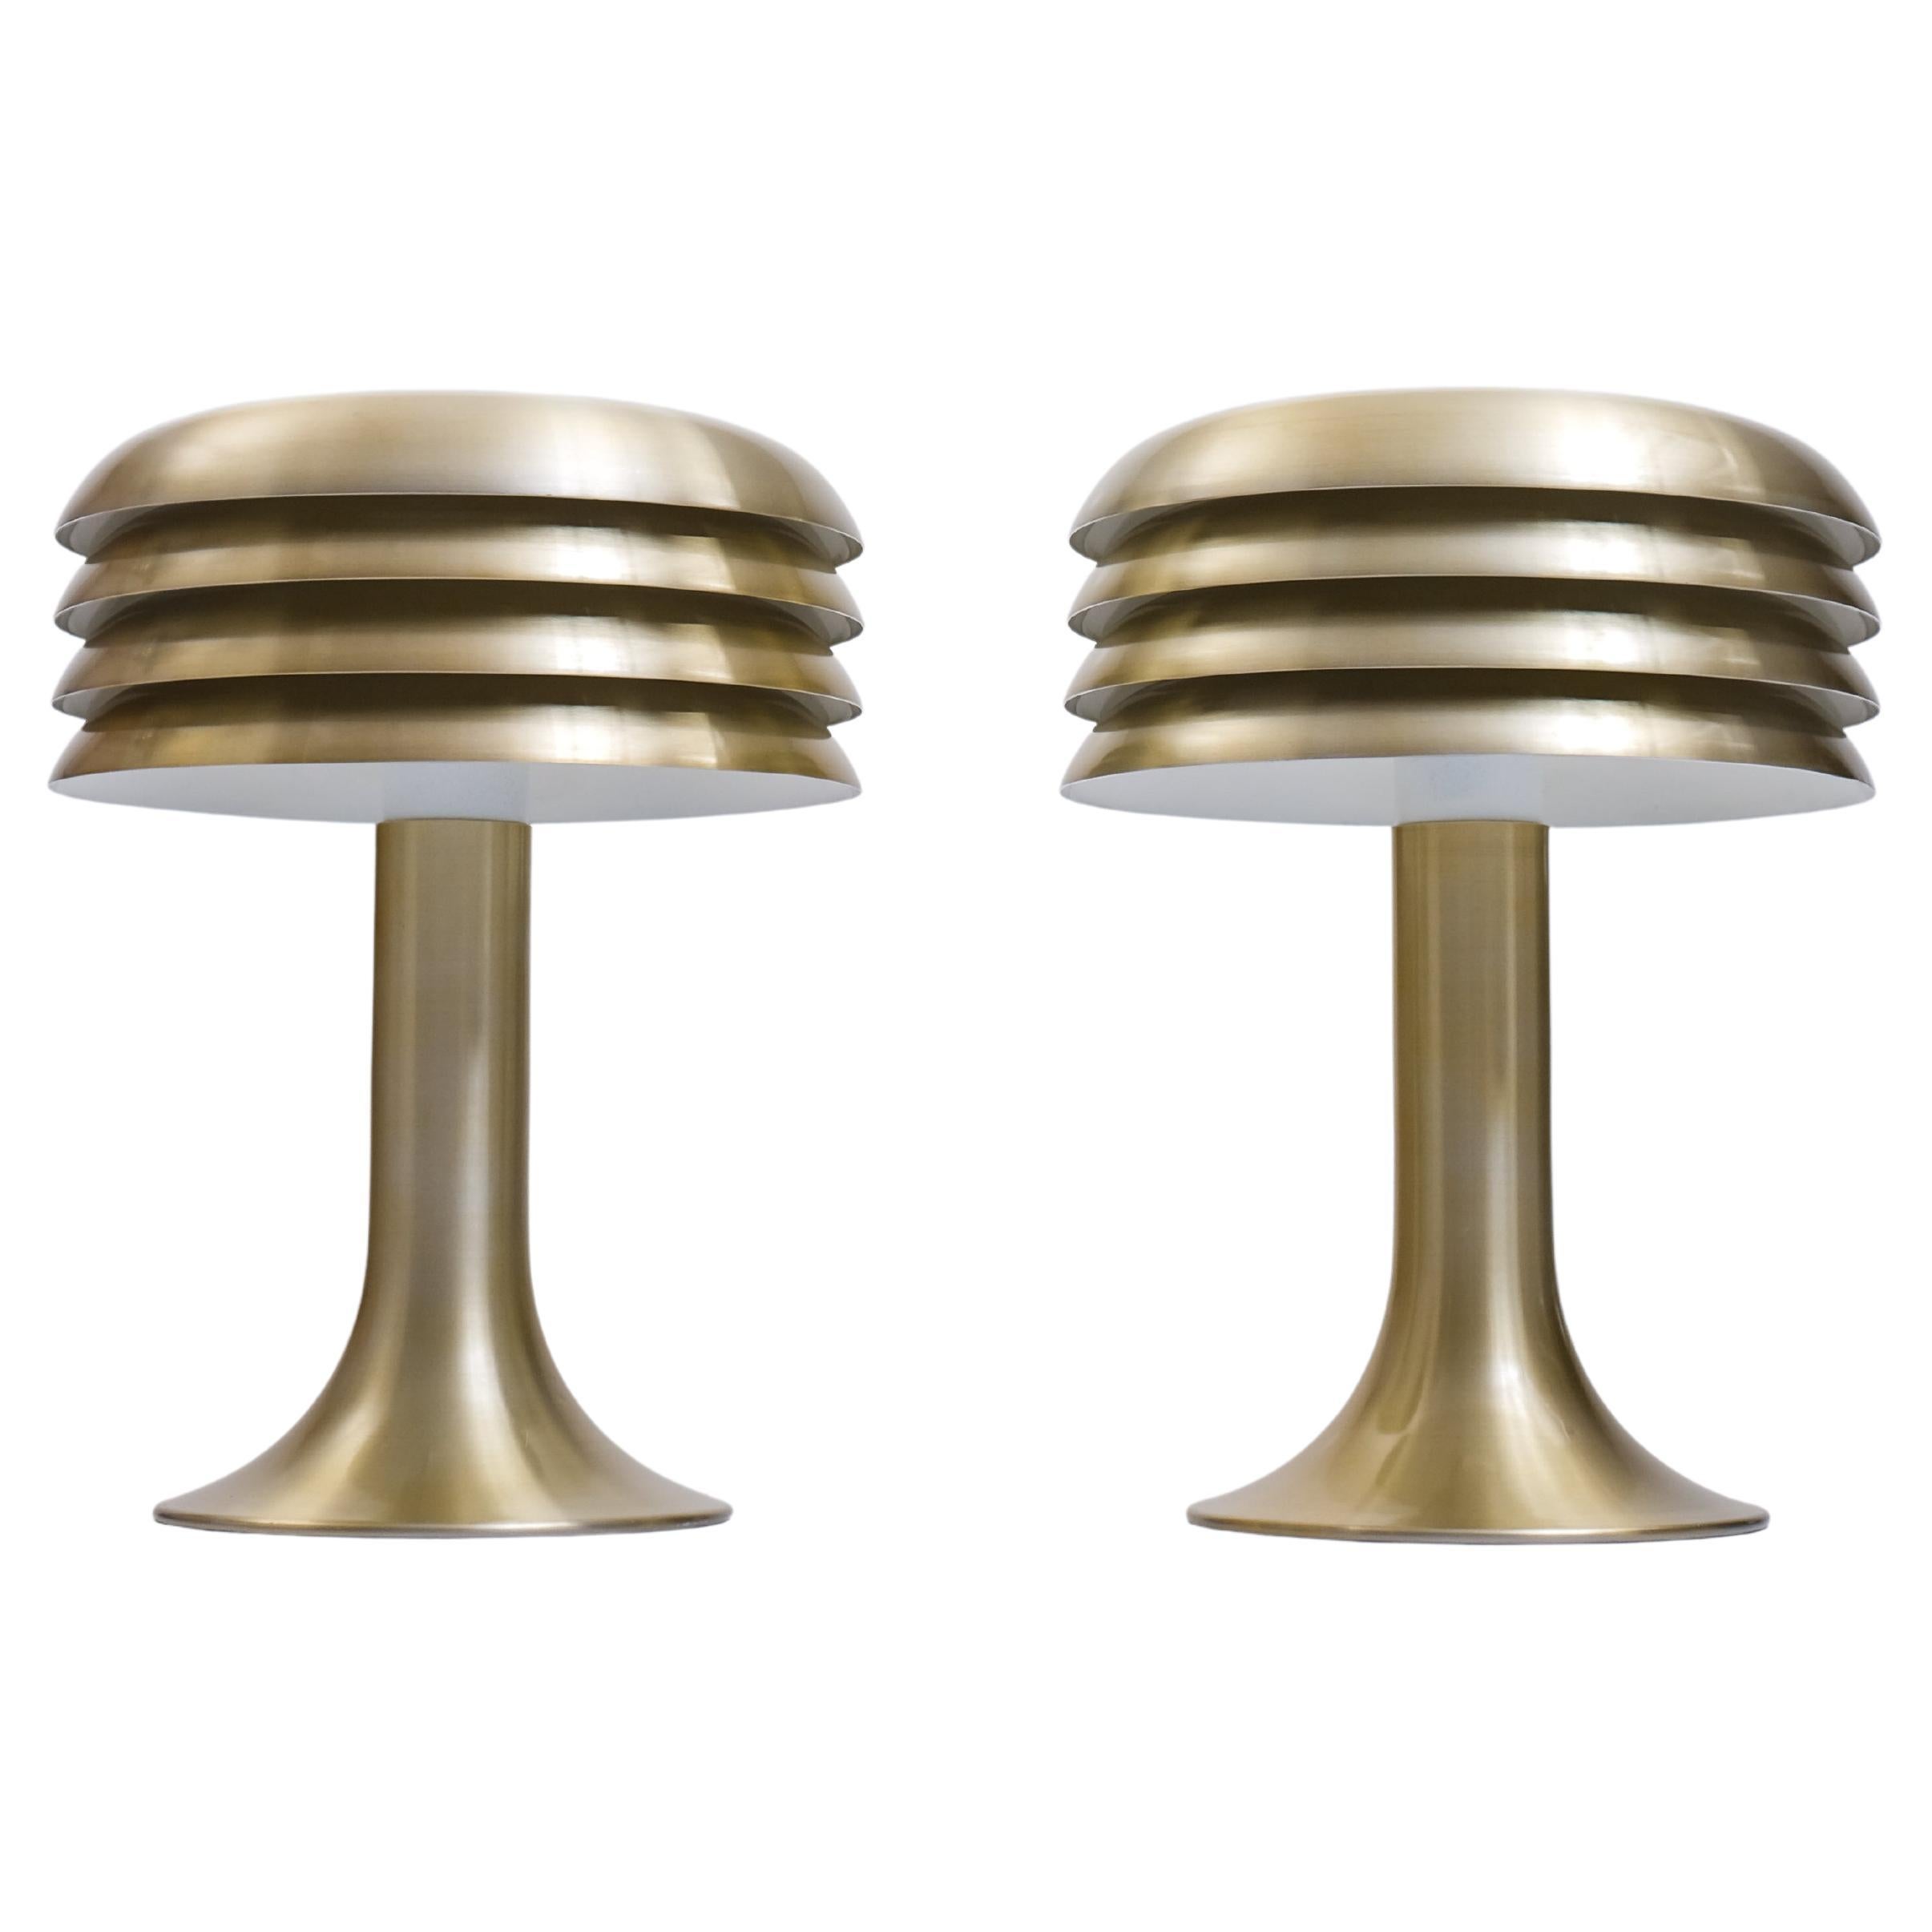 Pair of Hans-Agne Jakobsson Table Lamps BN-26, 1960s For Sale